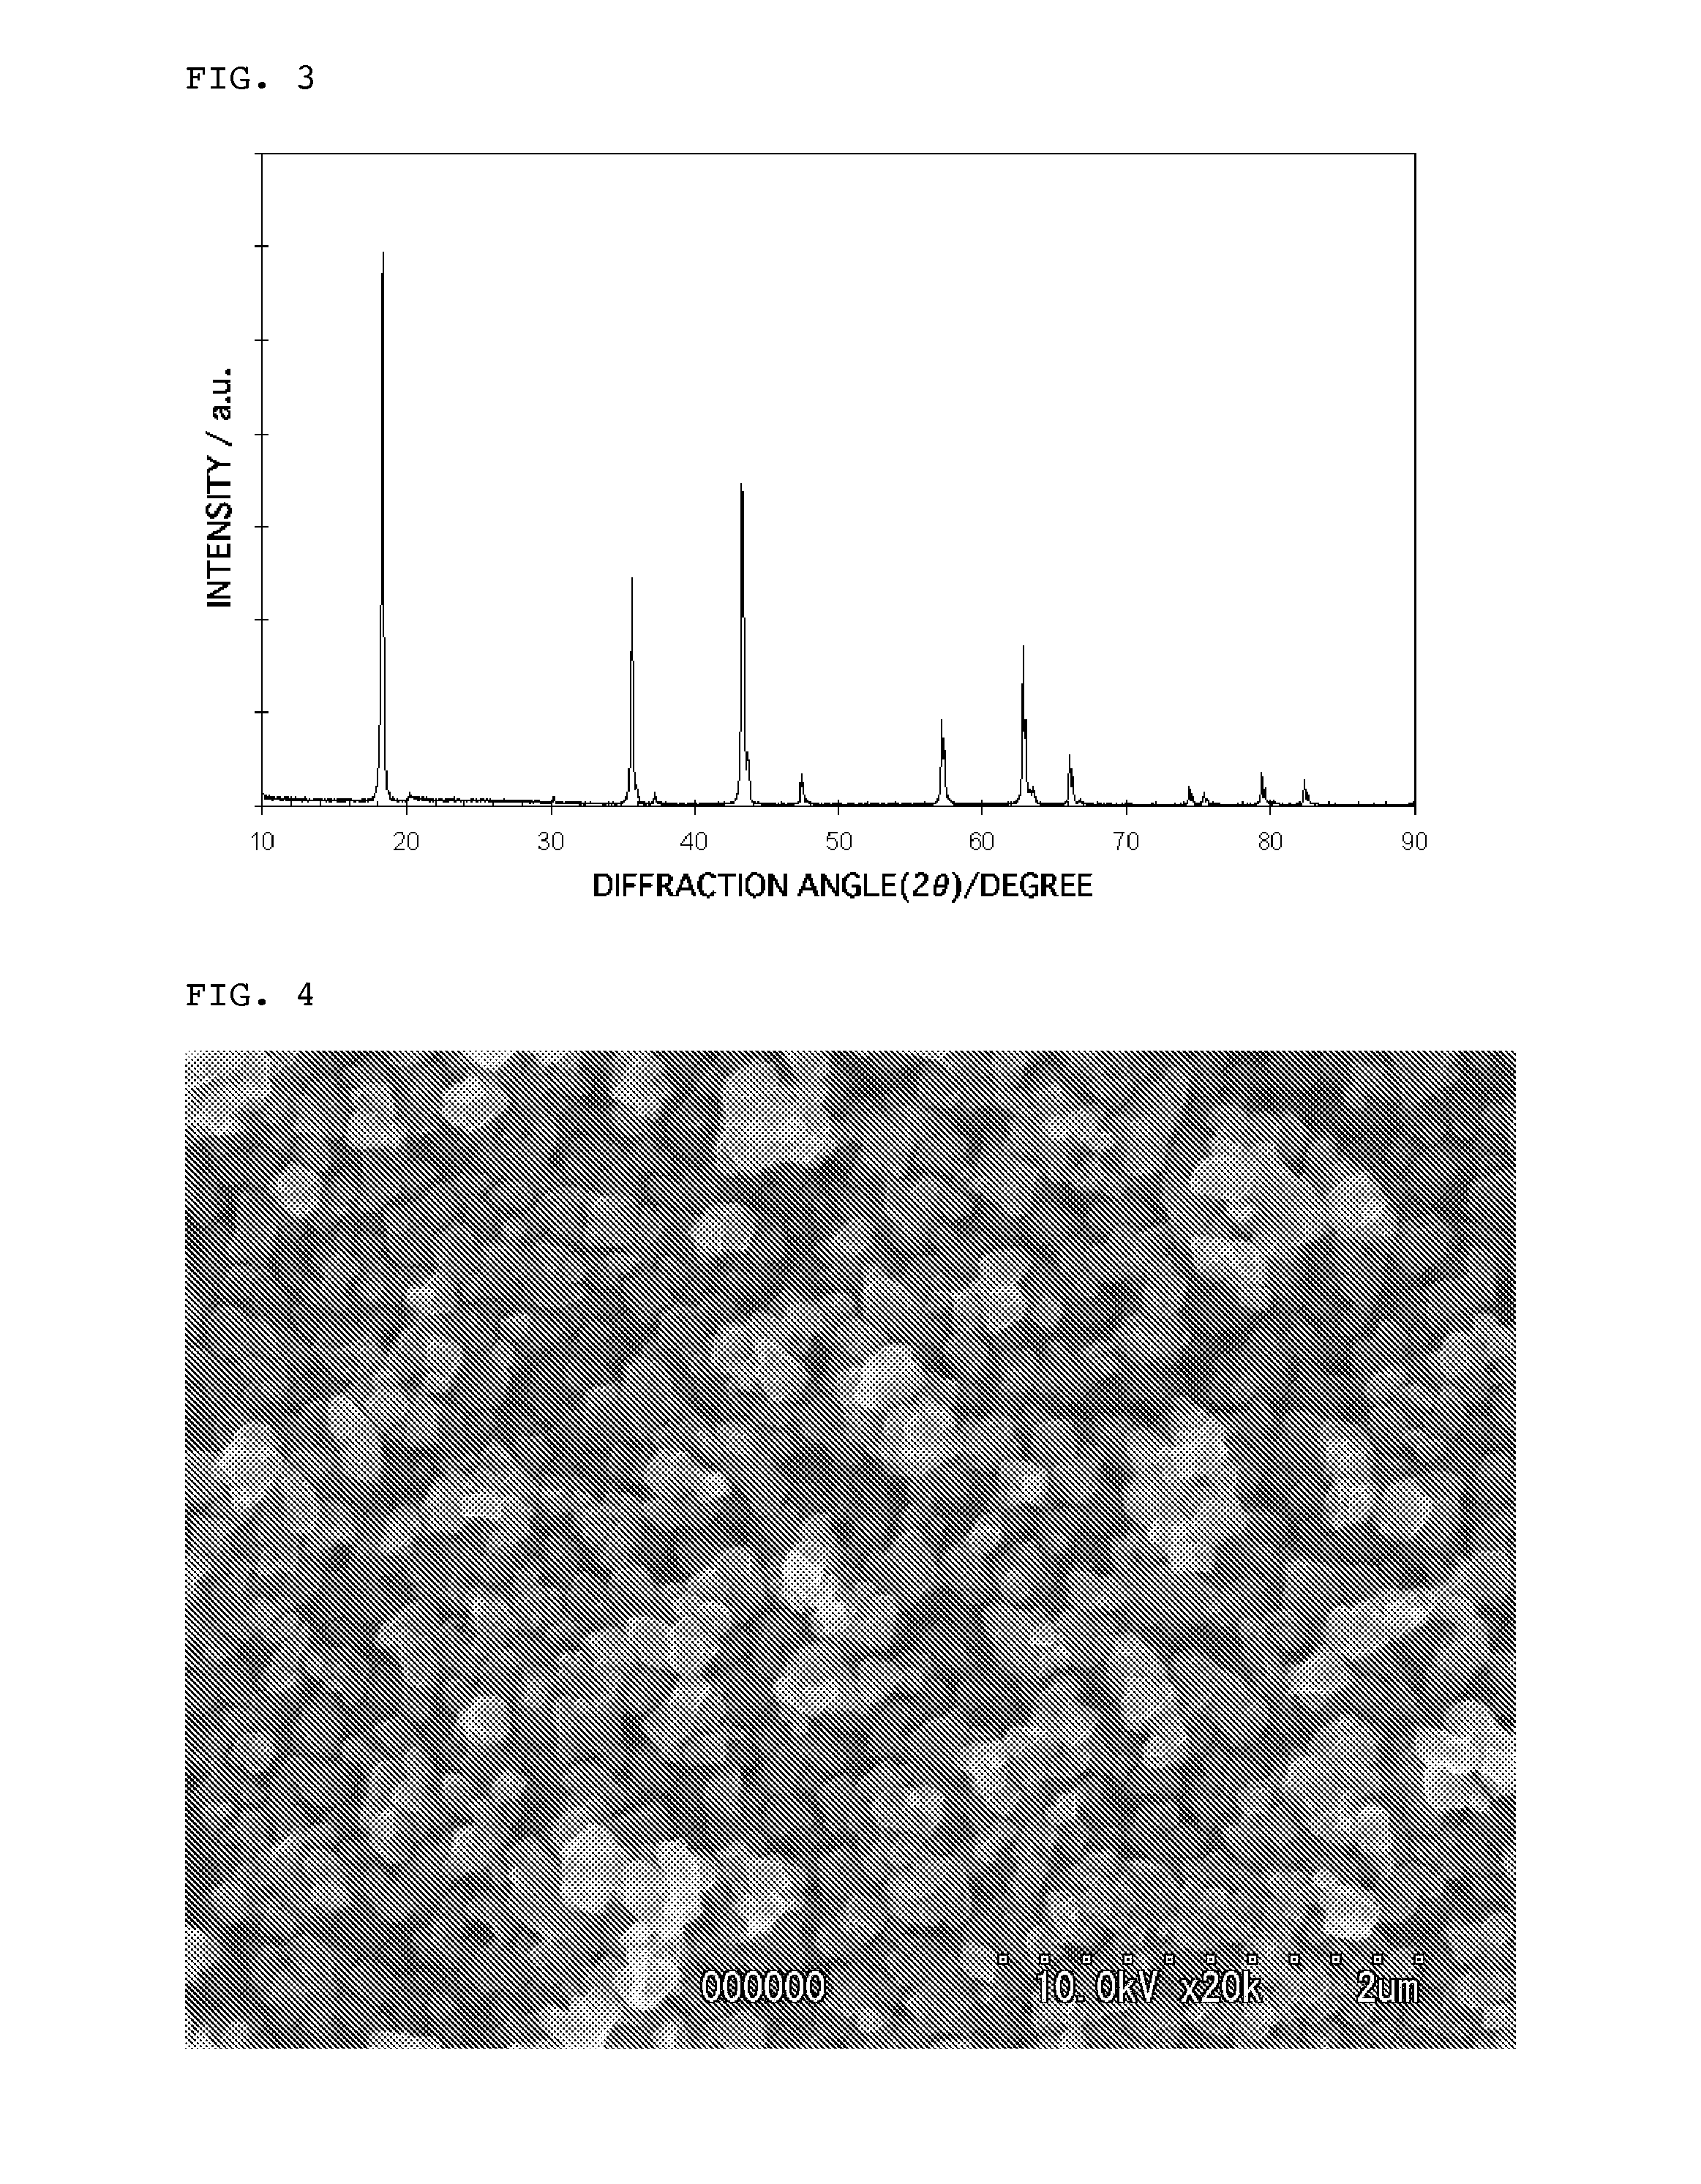 Lithium titanate particles and process for producing the lithium titante particles, MG-Containing lithium titanate particles and process for producing the MG-Containing lithium particles, negative electrode active substance particles for non-aqueous electrolyte secondary batteries, and non-aqeous electrolyte secondary battery